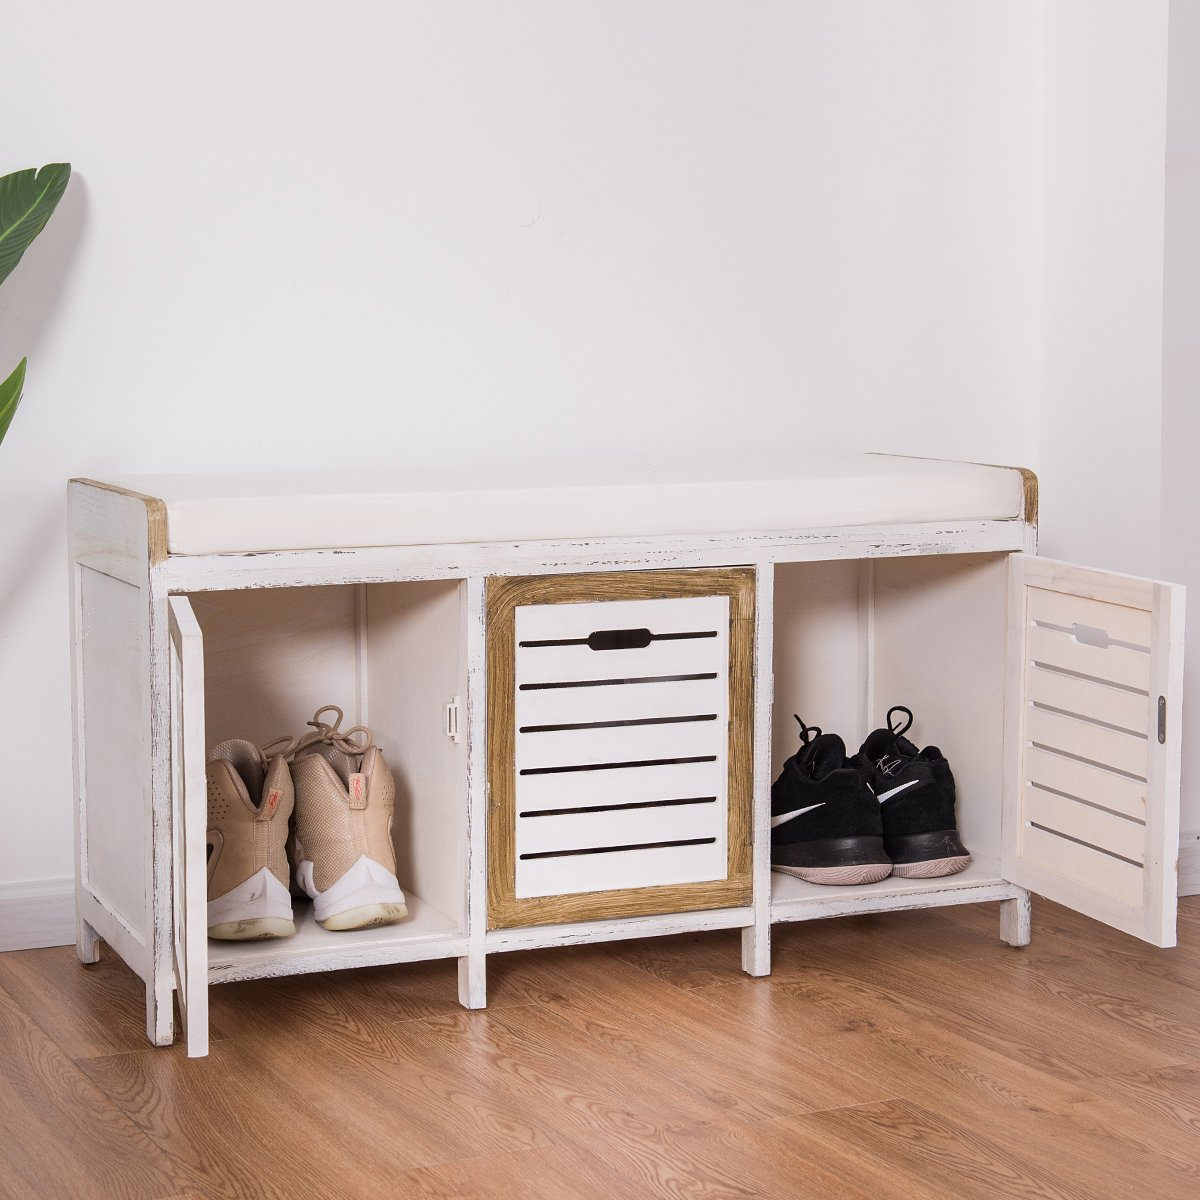 Take A Shoe Storage Bench for Your Entryway